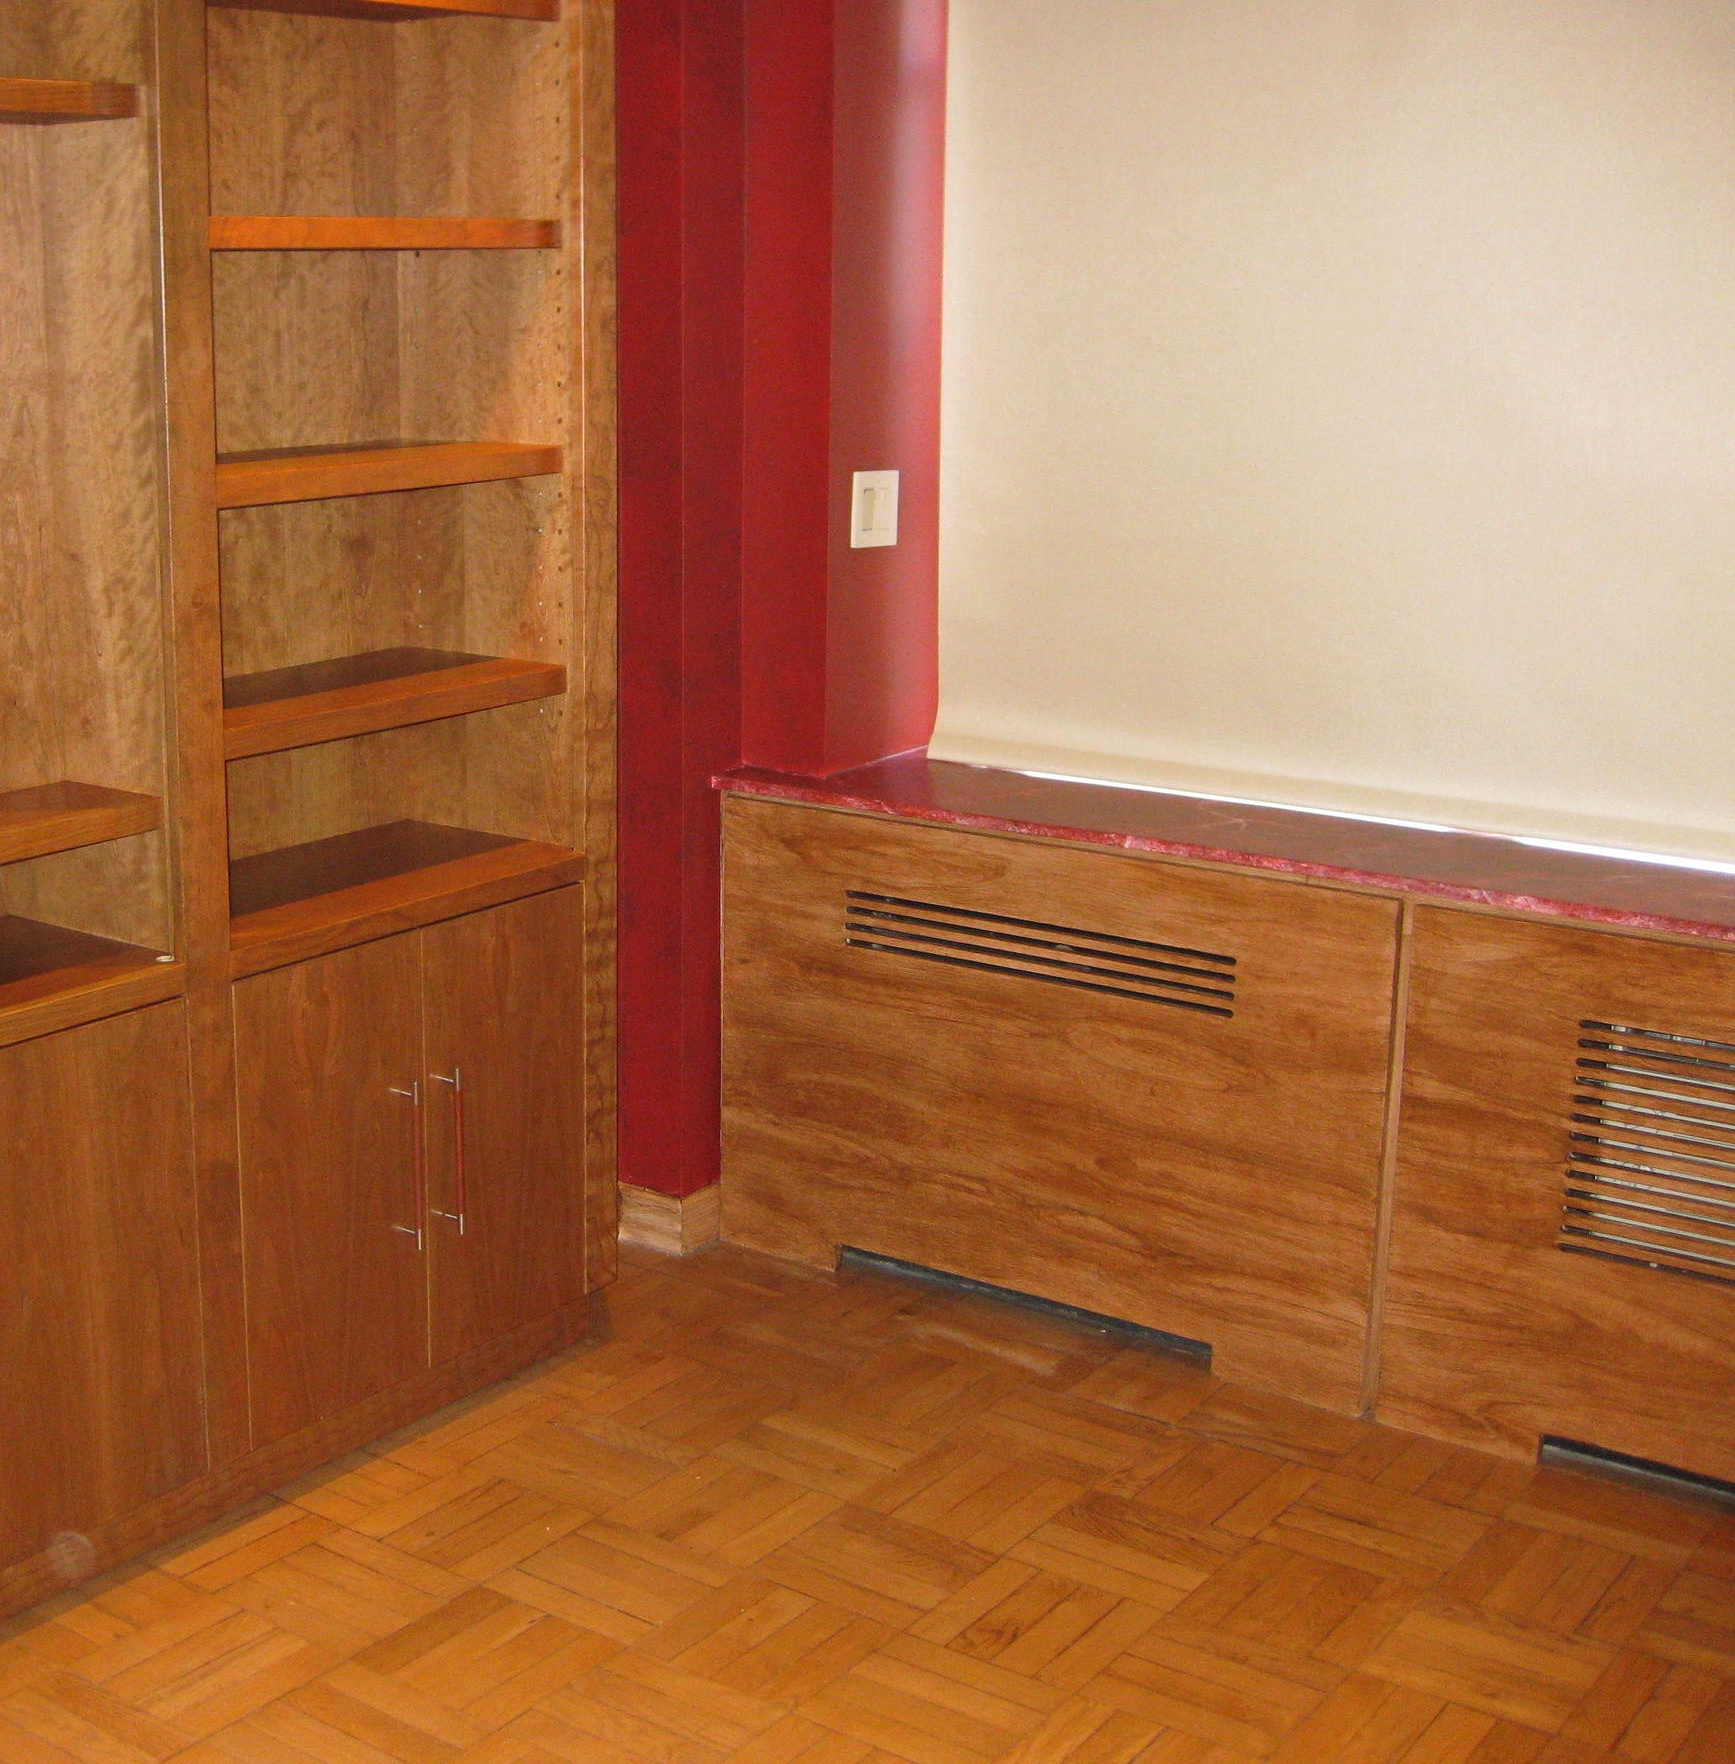 Woodgrained NYC Radiator Covers to Match Shelves